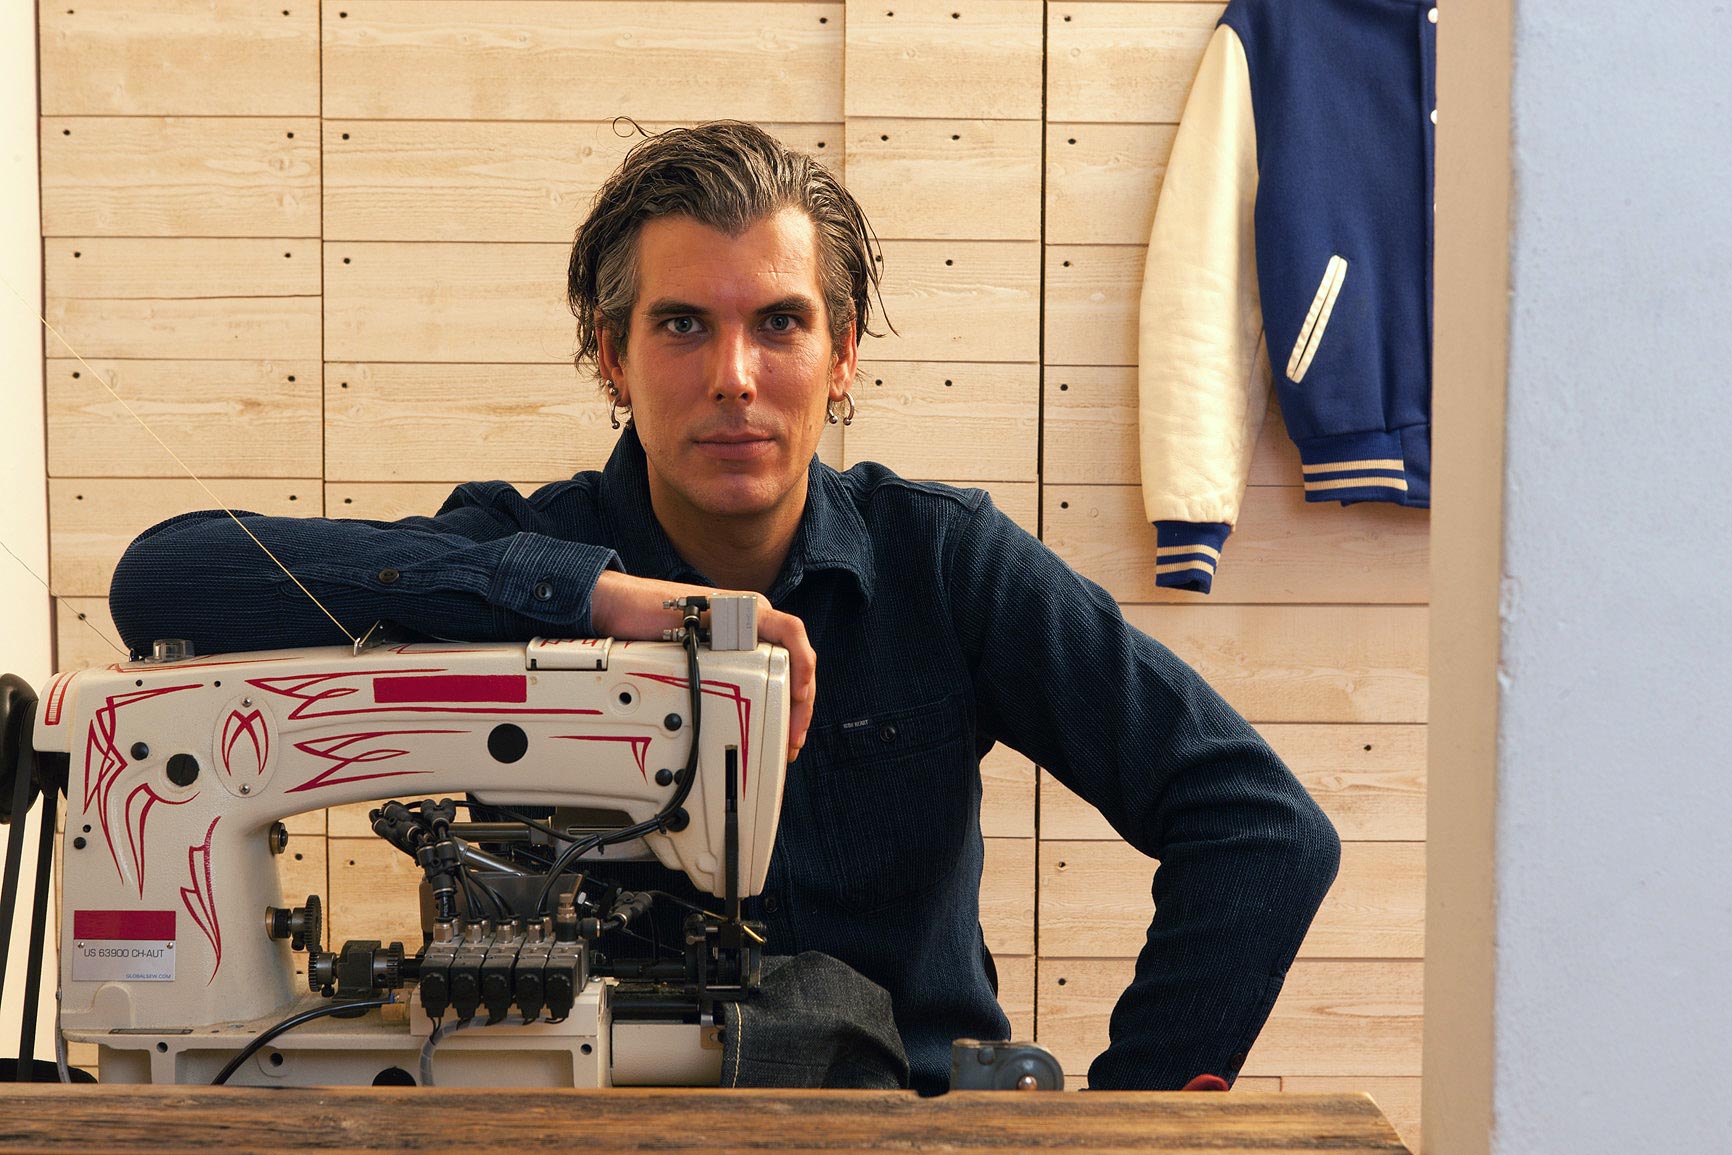 Man posing over chainstitch sewing machine.